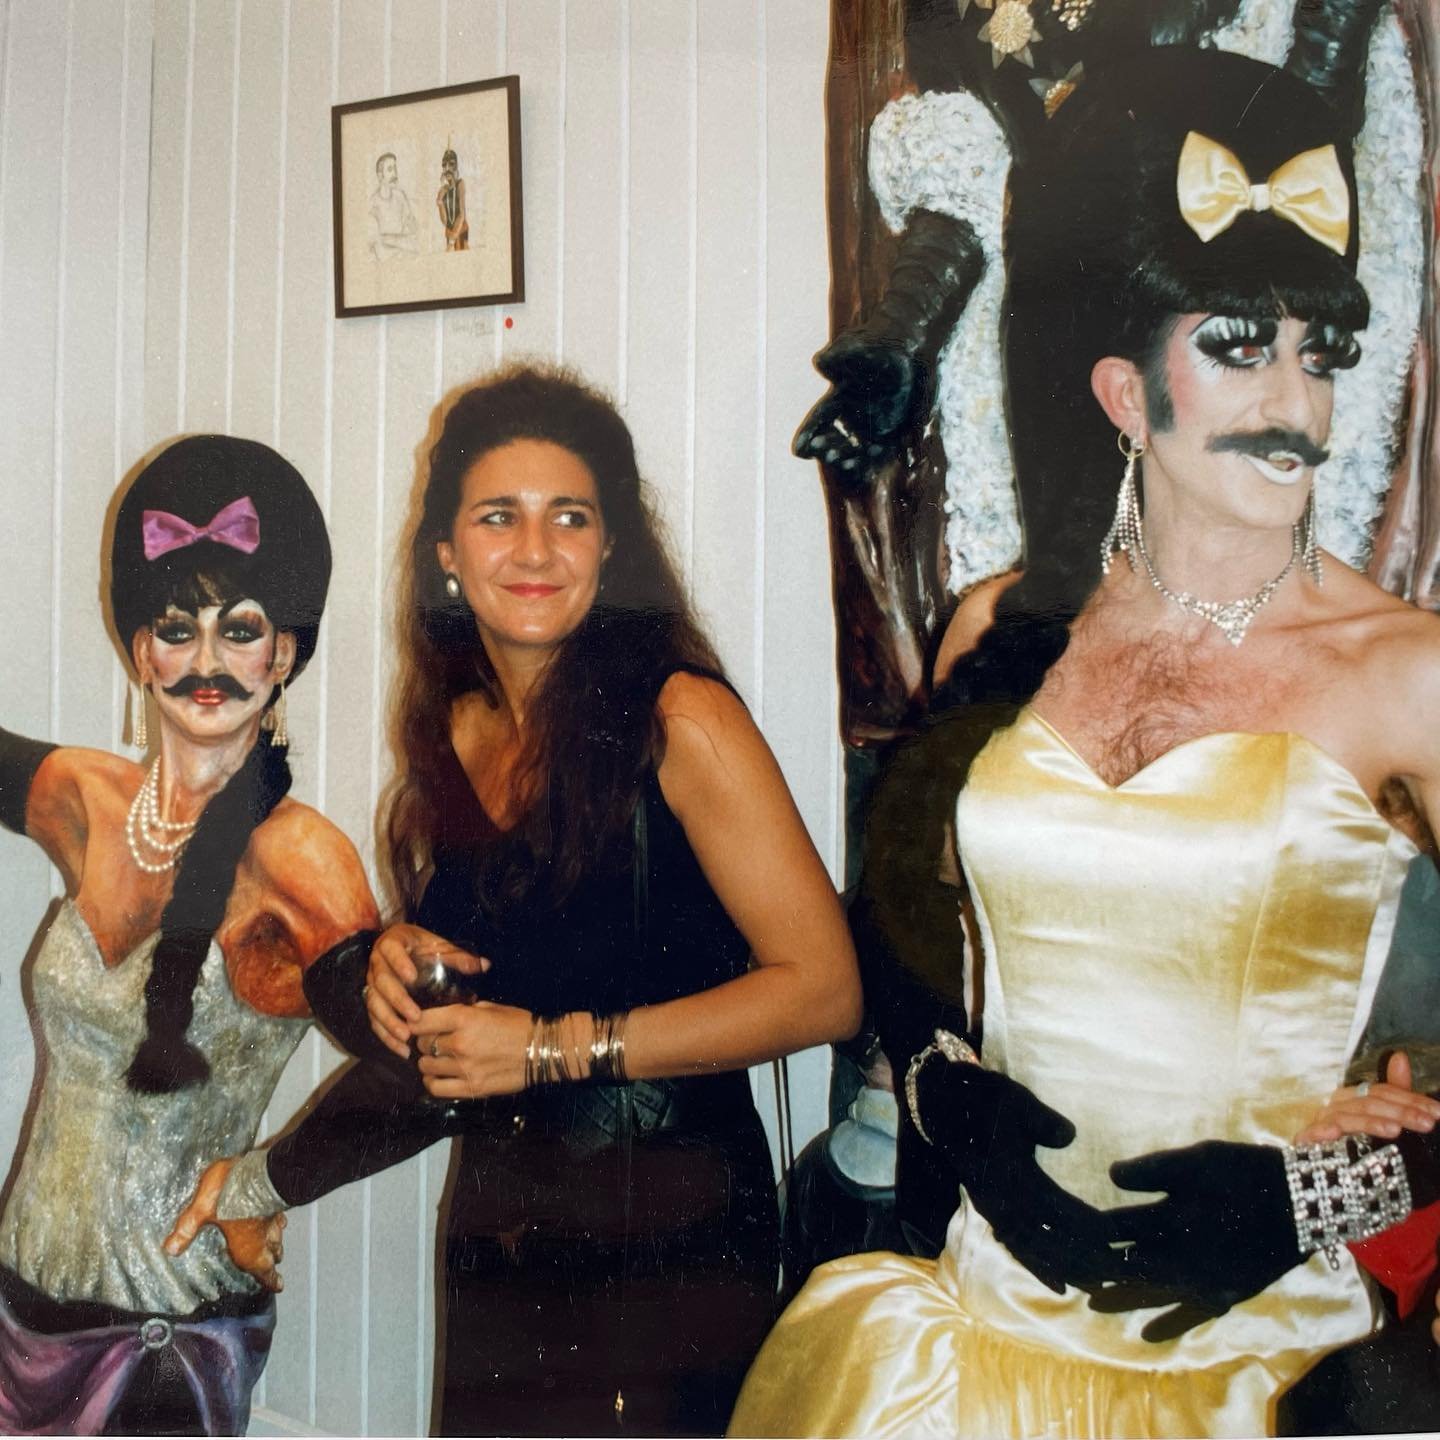 Finally found these sorting through old photos. Rarely do I post photos of myself, but this was another era, my East End London days, youth on my side! I used to hang out with Penny/ Robert who introduced me to the world of drag in the 1980&rsquo;s I